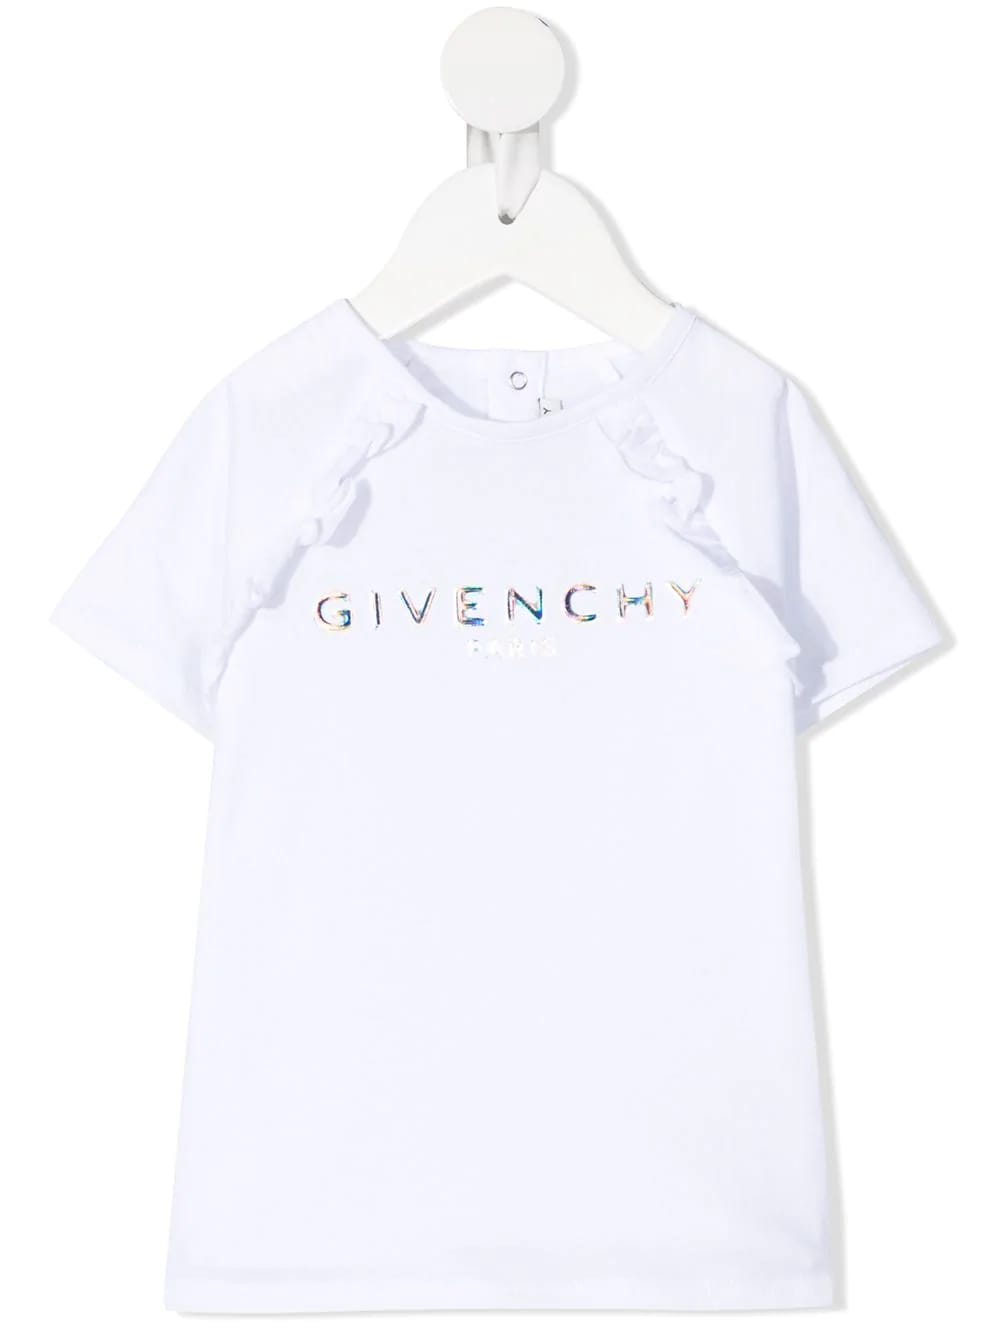 GIVENCHY LOGO EMBROIDERED T-SHIRT,H05168 10B